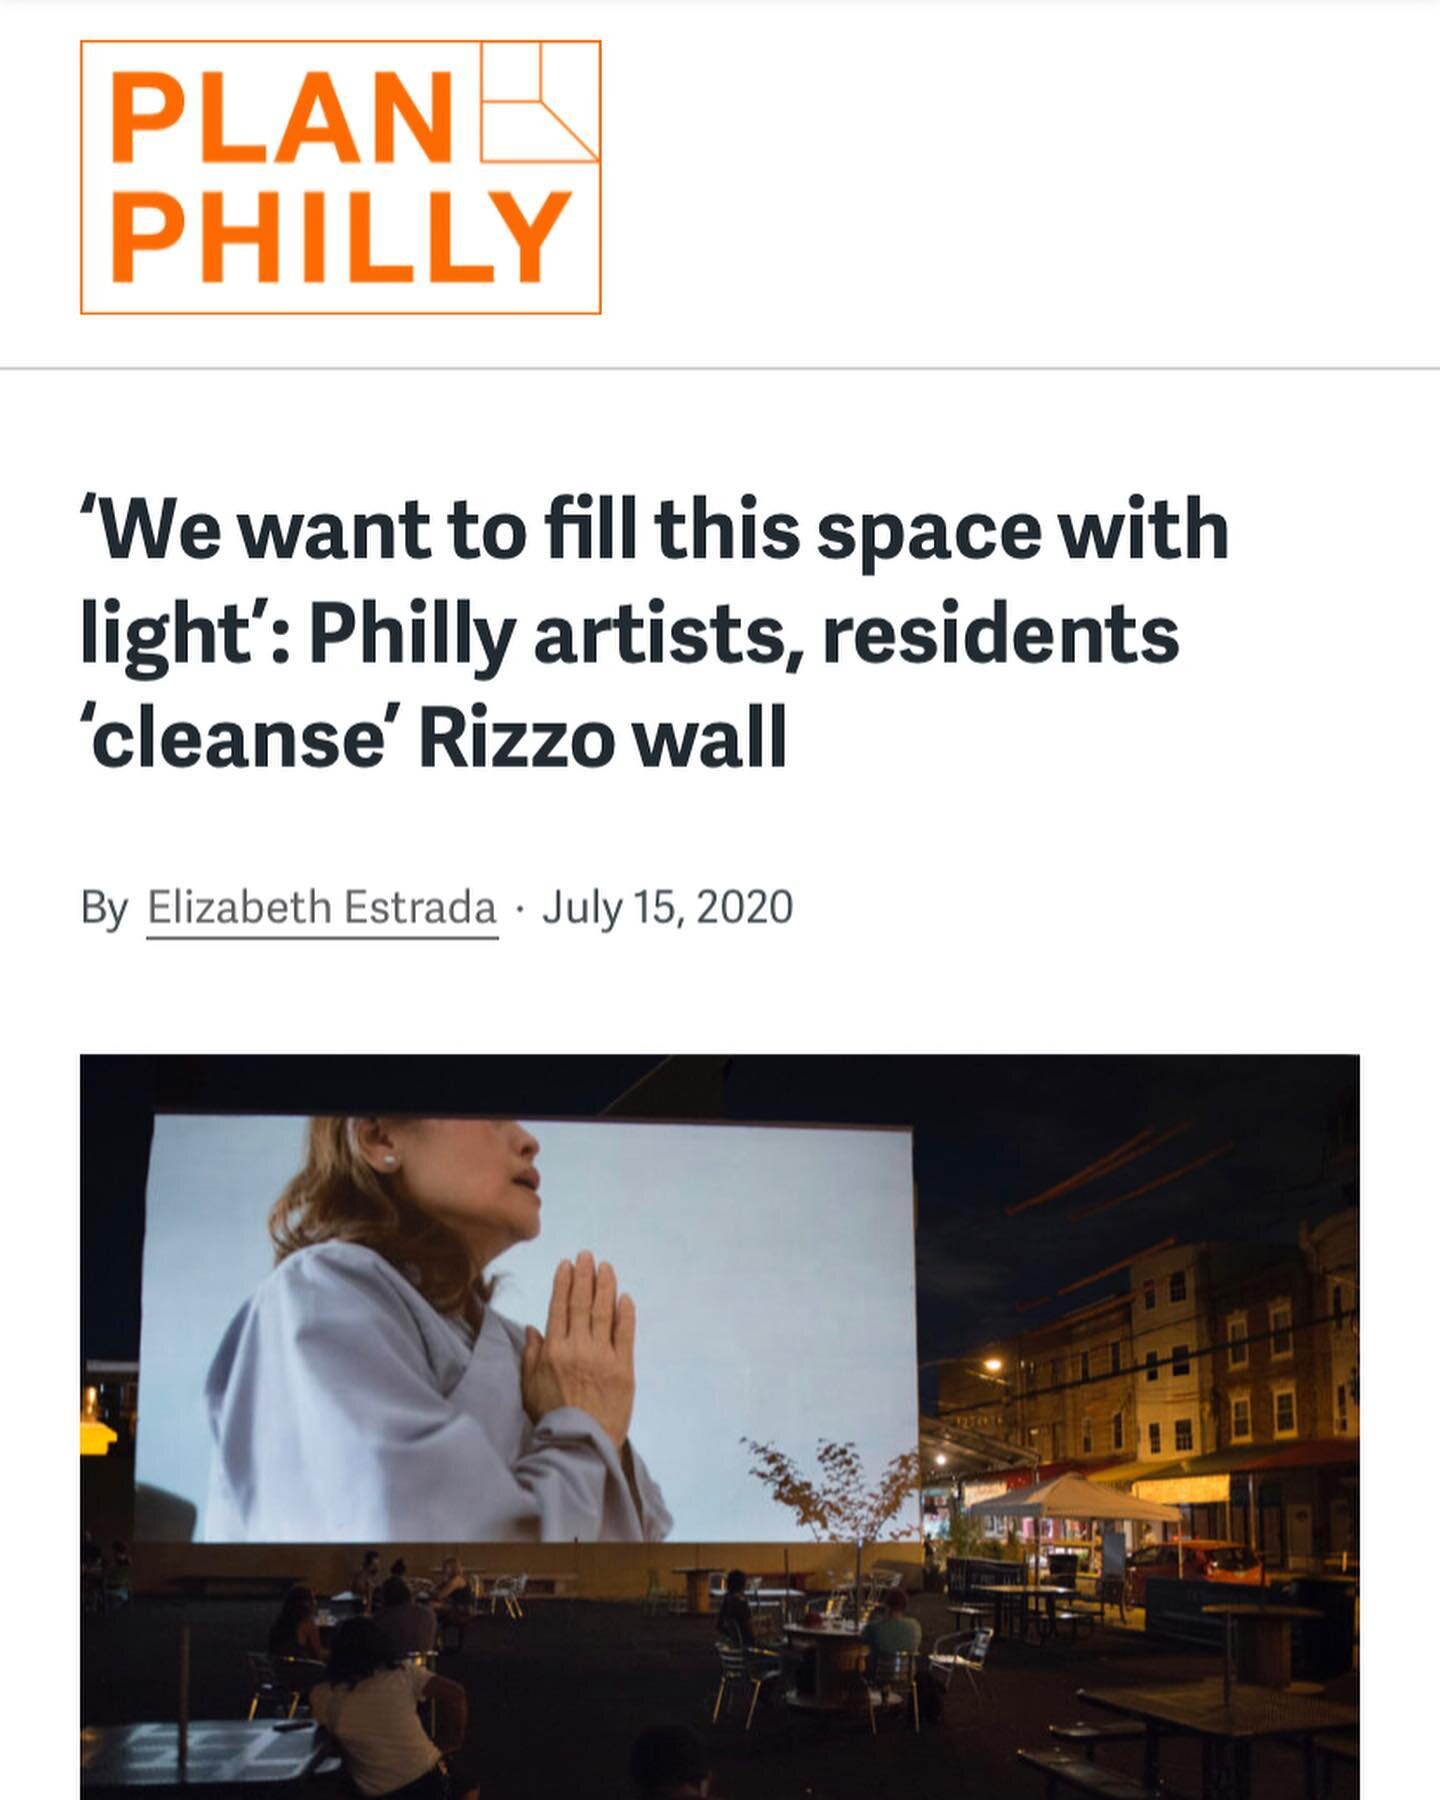 Check out the recent @whyy @planphilly article about our team of artists coming together to #CLEANSE the former #Rizzo mural site in South Philadelphia. Read the full article in our bio link. 👆🏼#bellavista #9thStreetMarket #publicart #contemporarya